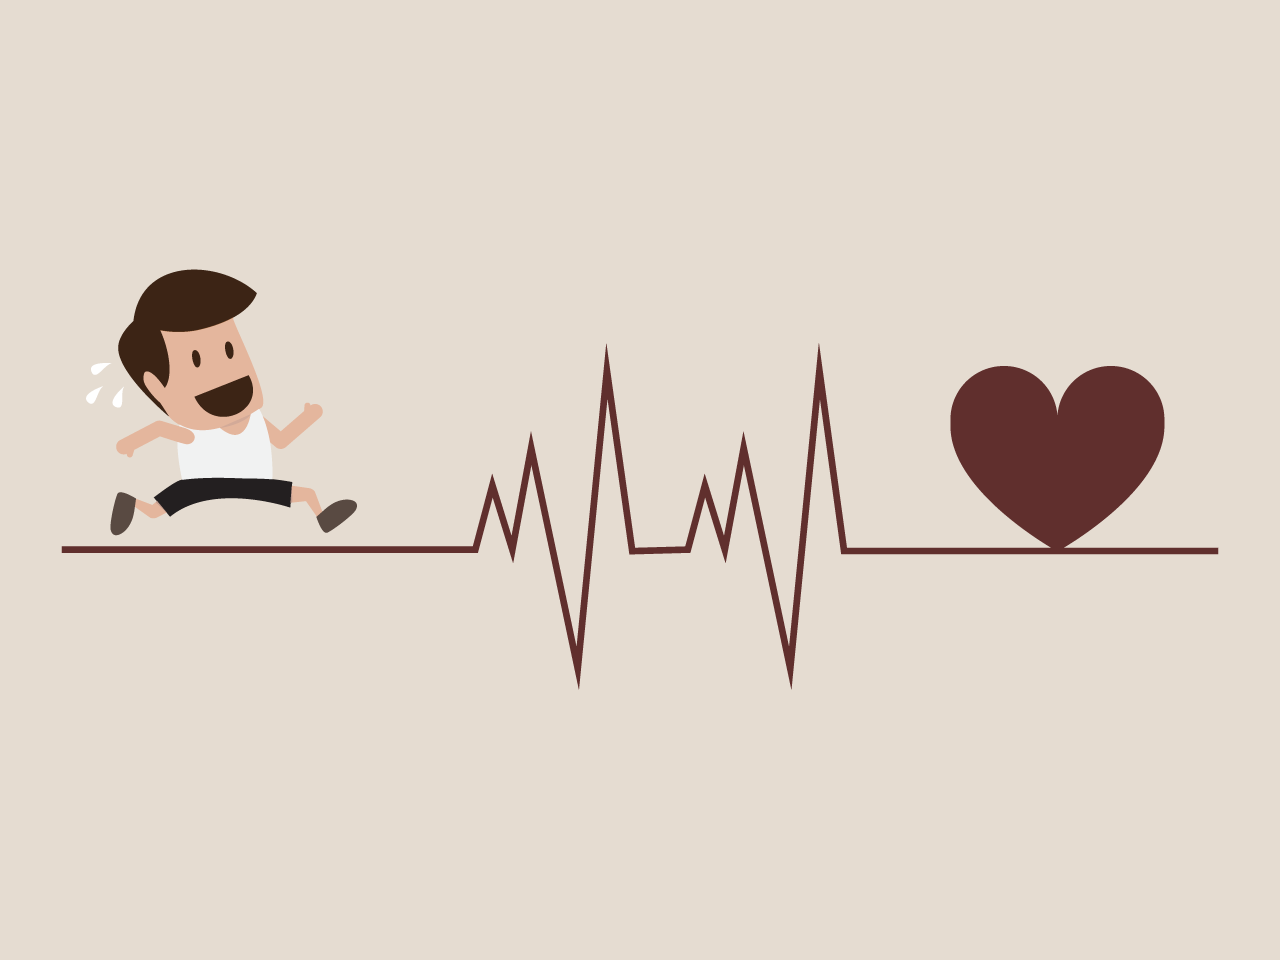 Illustration of man jogging against heart symbol and graph